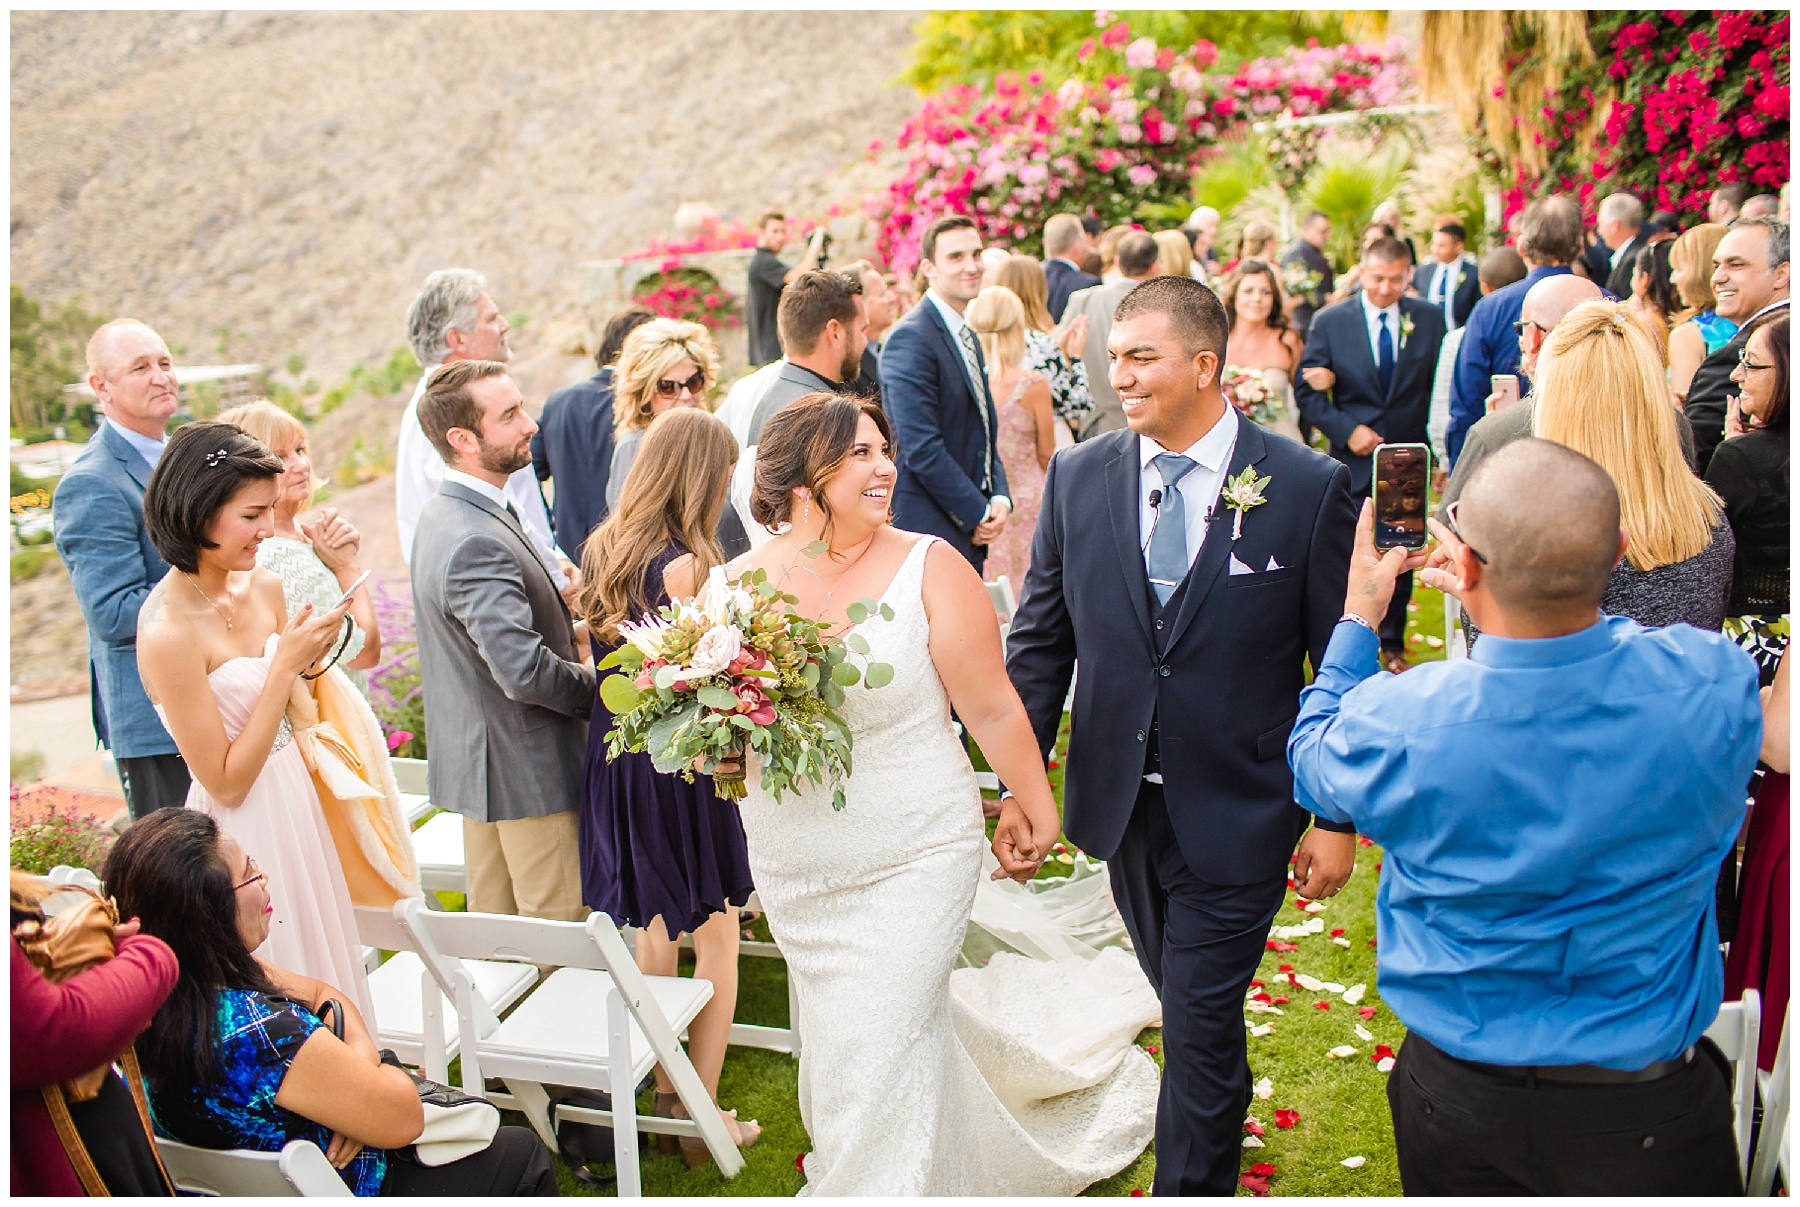 O'Donnell House wedding Palm Springs Photographer